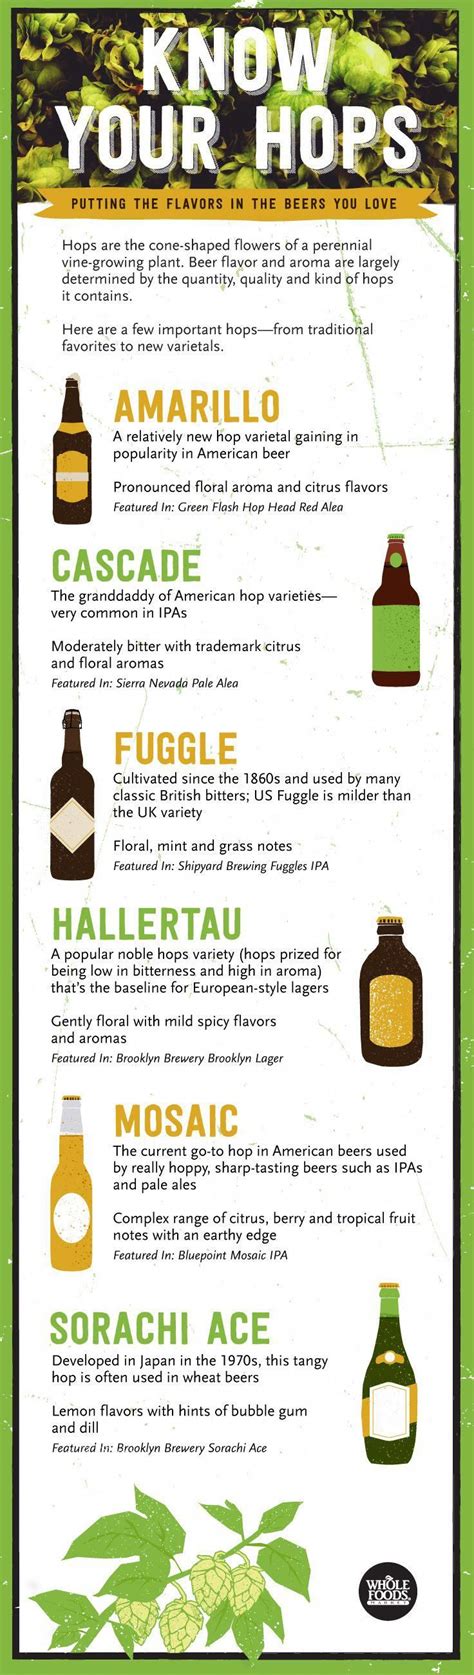 Hops Are Important In Determining The Flavor Of Your Favorite Beers